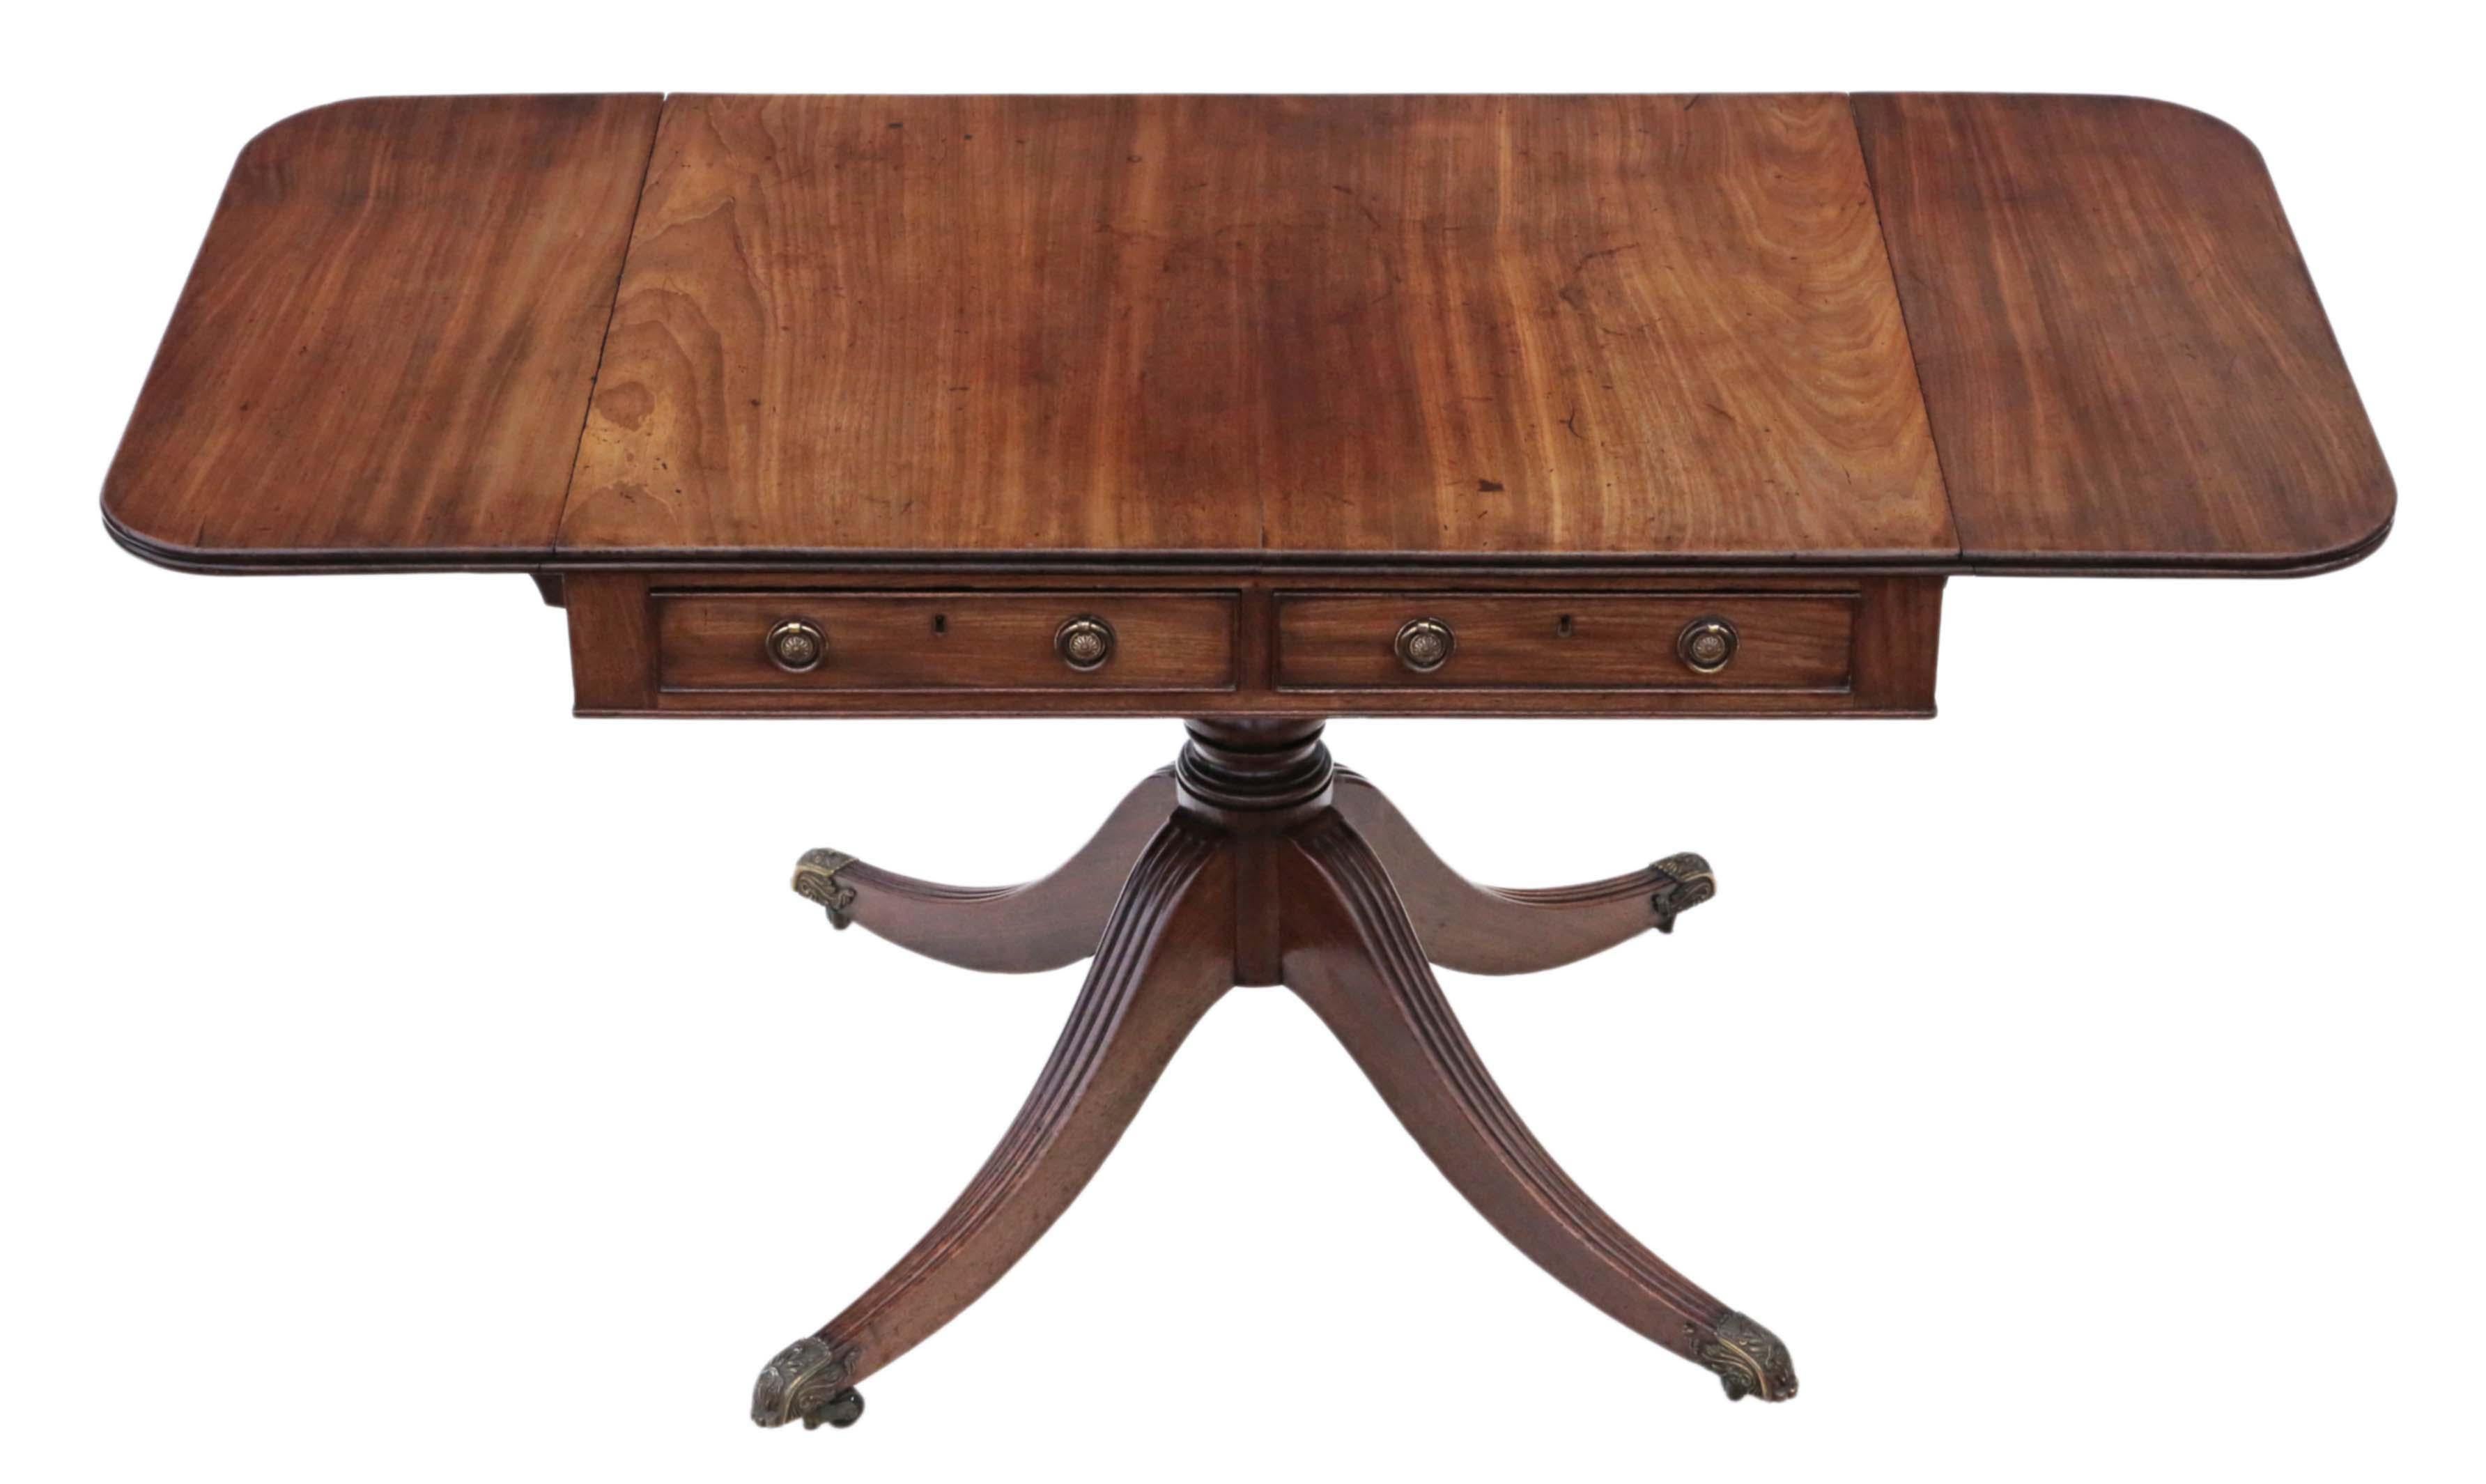 Regency C1825 mahogany sofa table, 19th century.

One of the best that you will find. Fantastic period castors.

Two large active oak lined drawers to one side and two dummies to the other. The drawers slide freely.

Solid with no loose